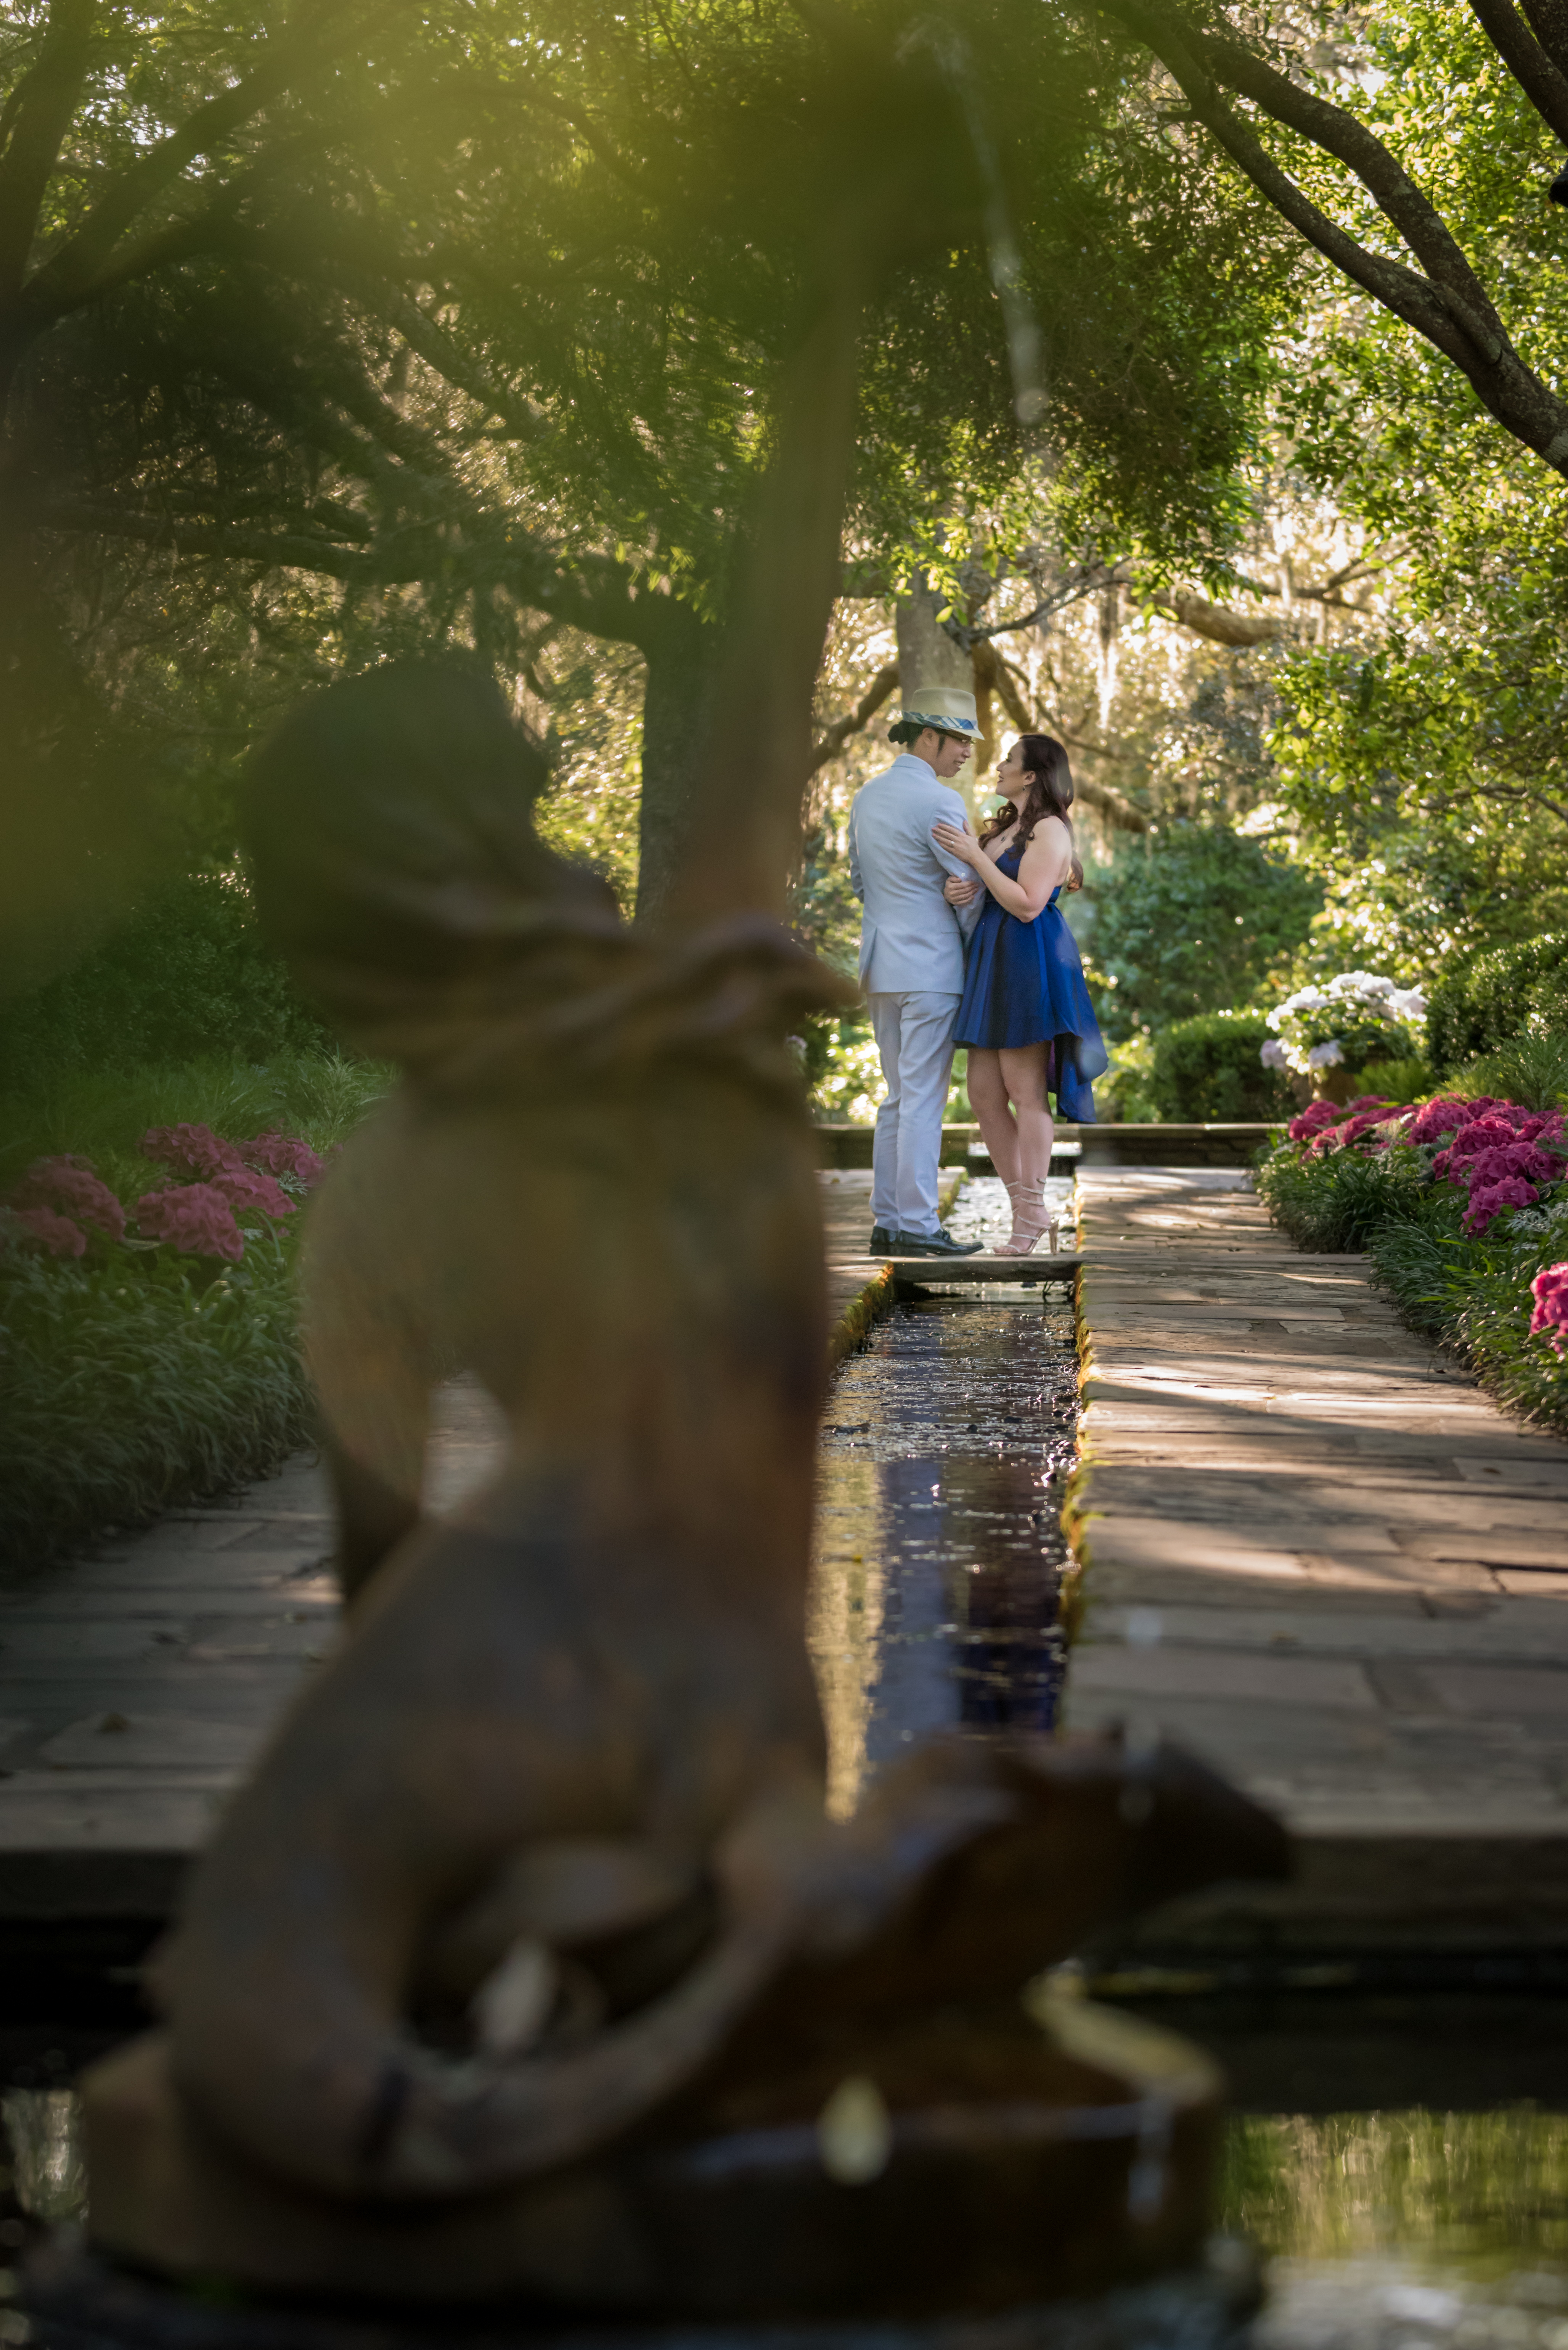 Mermaid Fountain and Couple at Bellingrath Gardens - Candice Brown Photography